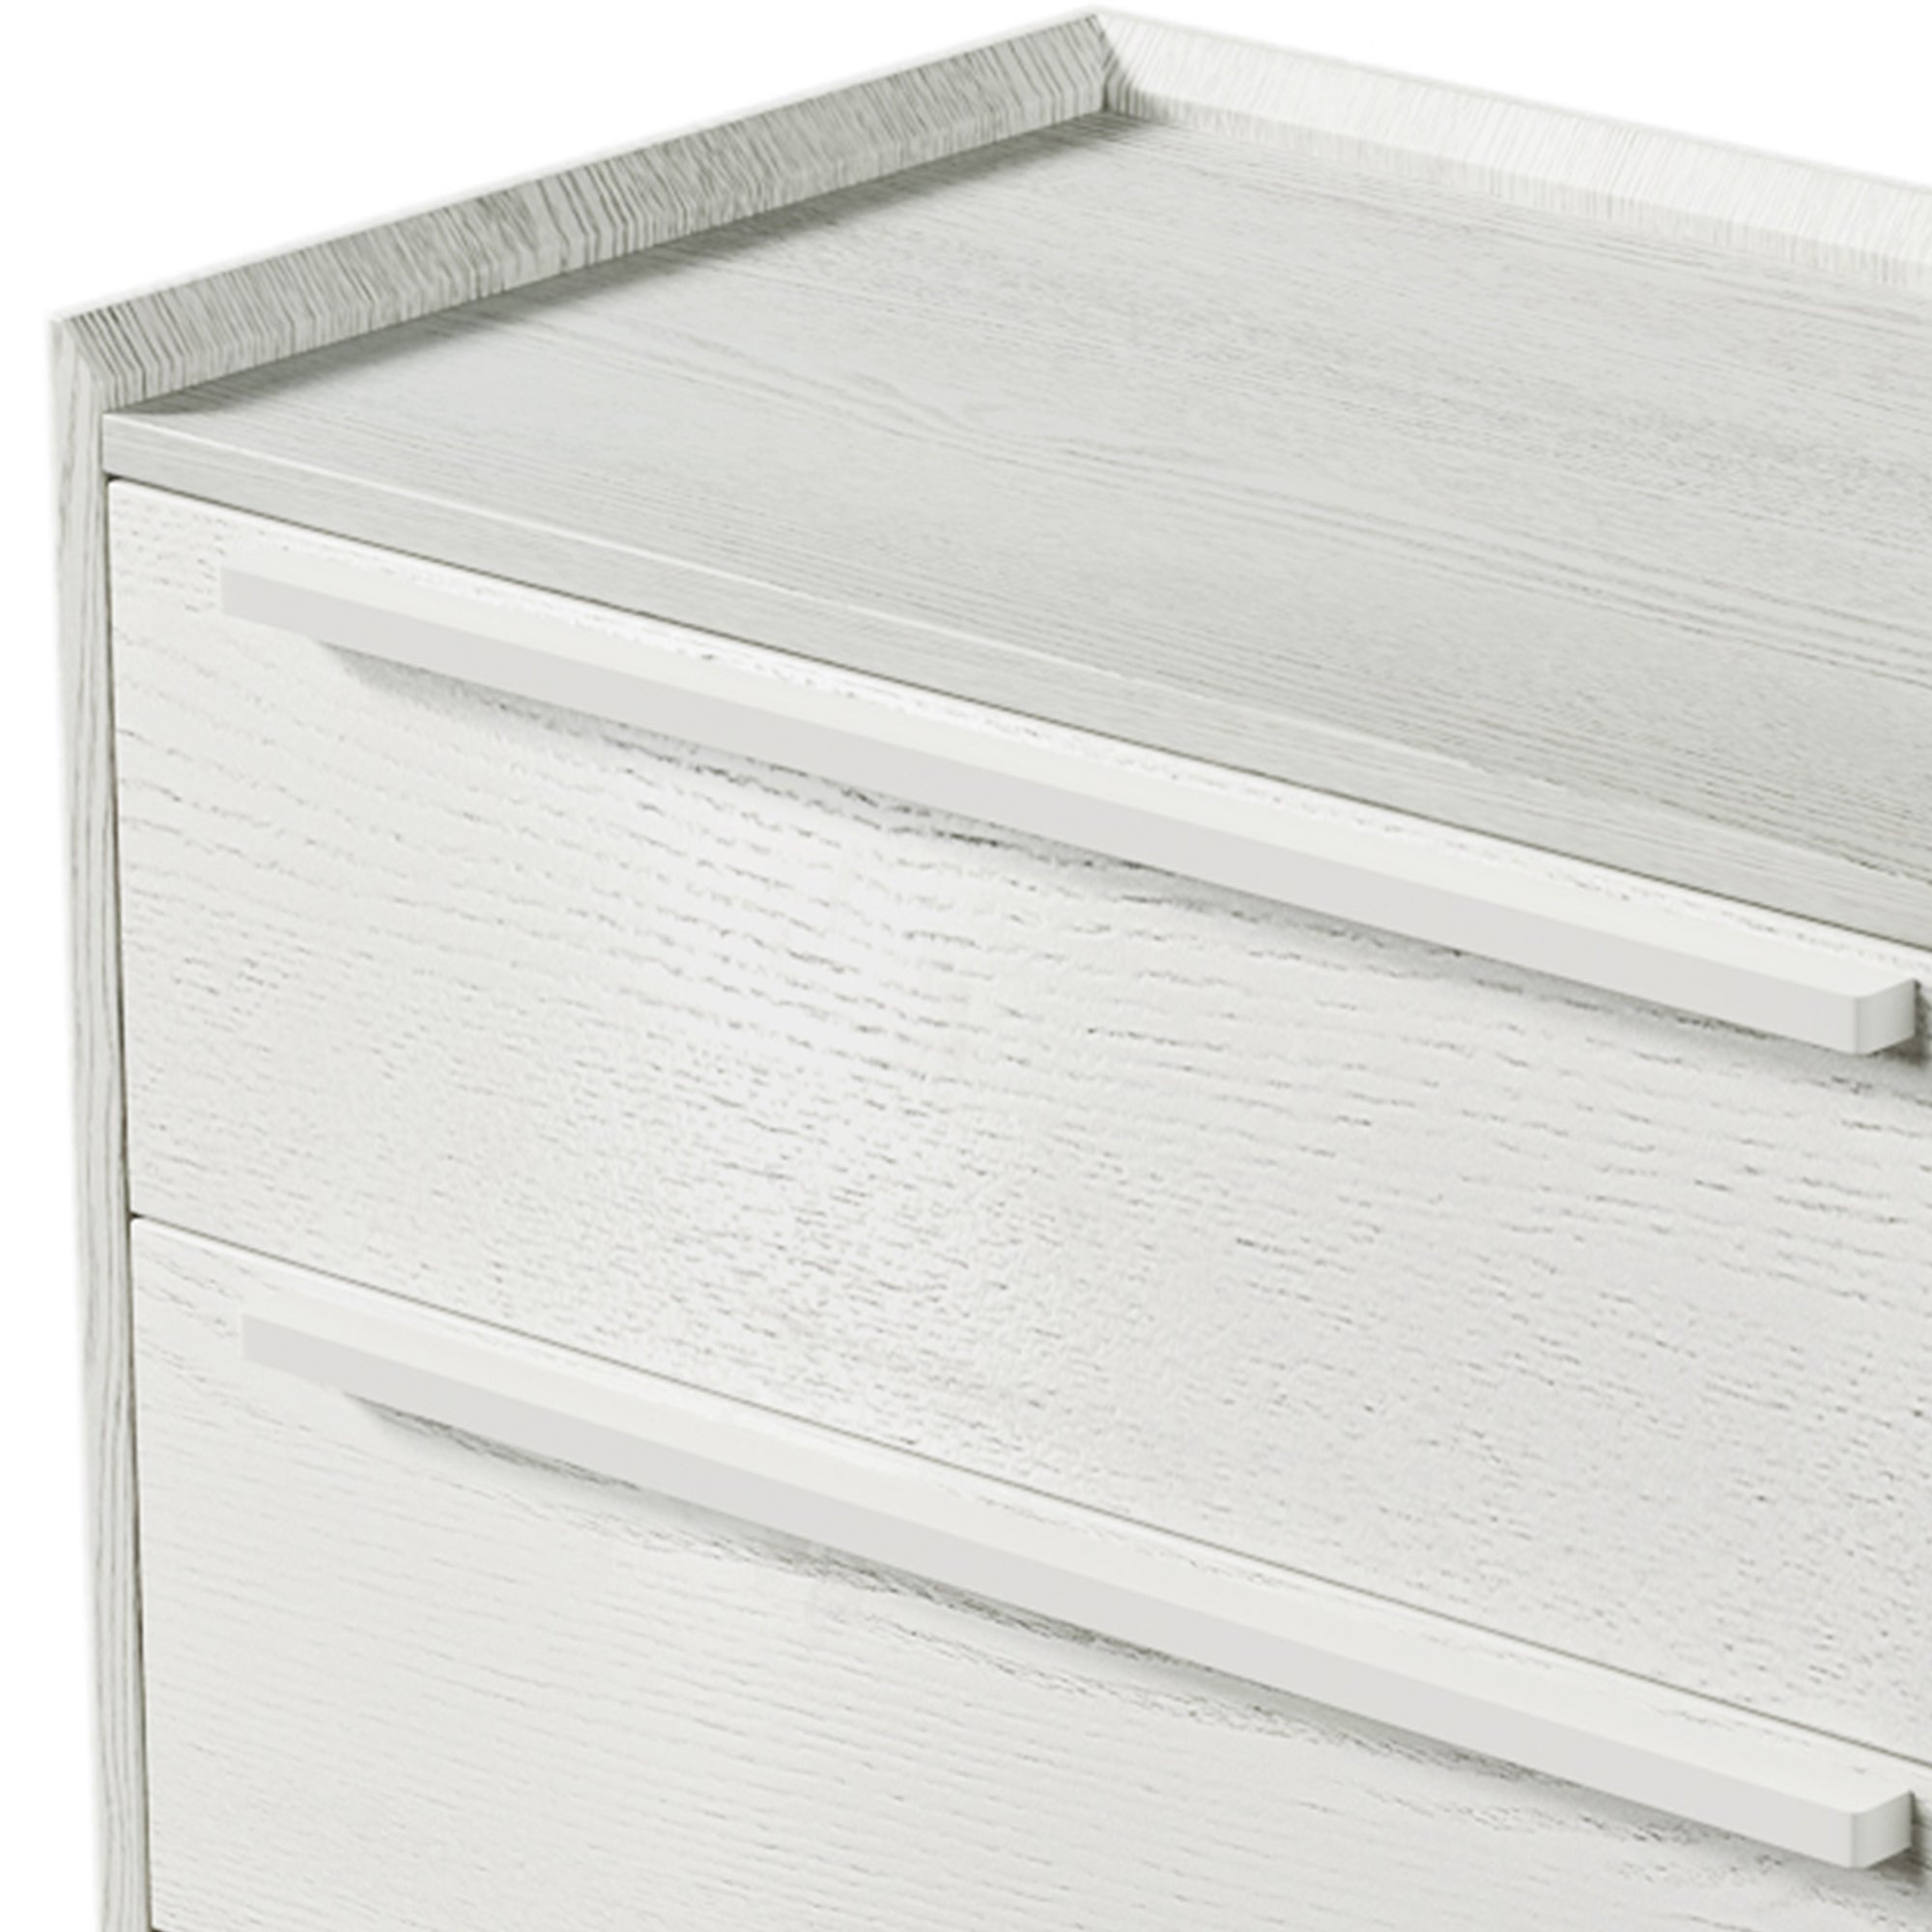 Modern Style Manufactured Wood 9-Drawer Dresser with Solid Wood Legs - White